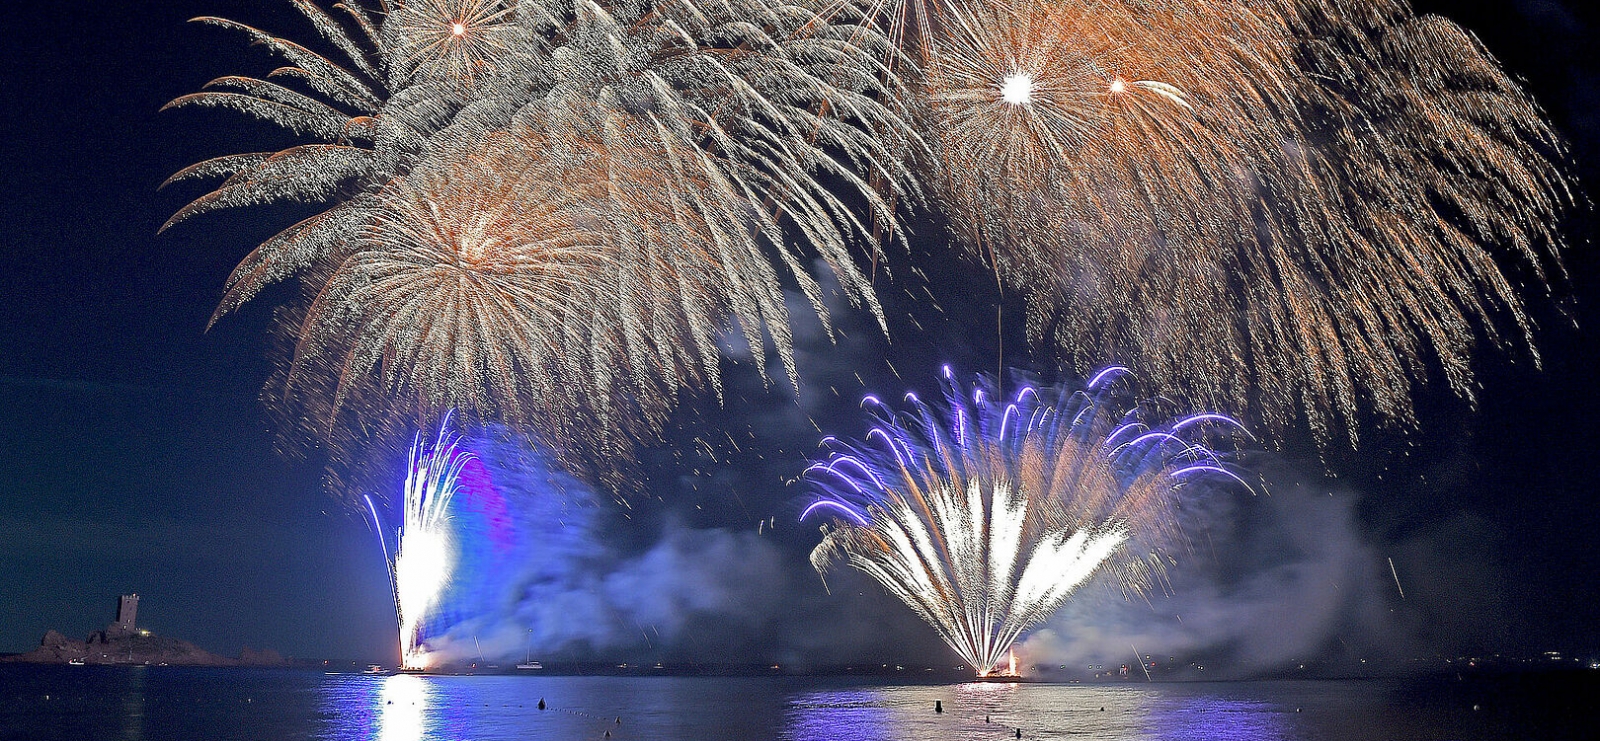 Fireworks on 15th August